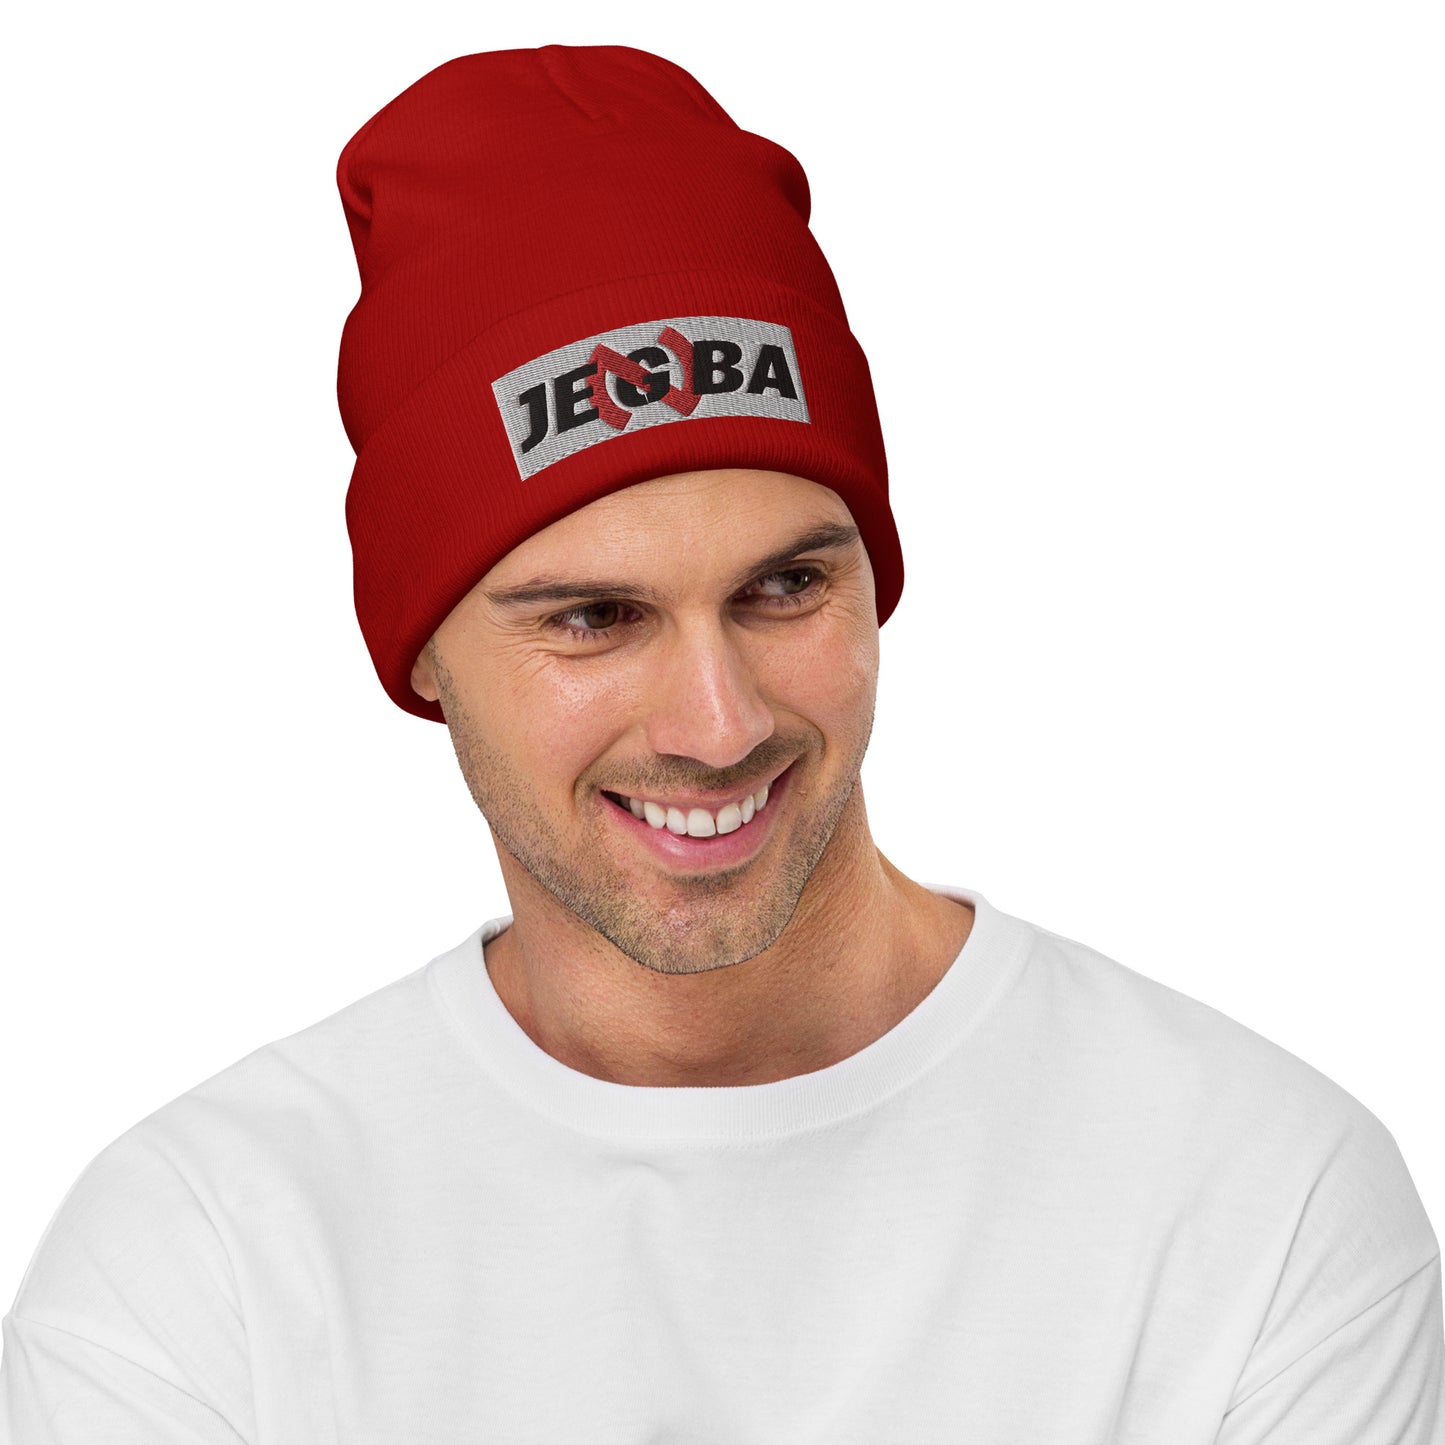 JENGbA Embroidered Beanie